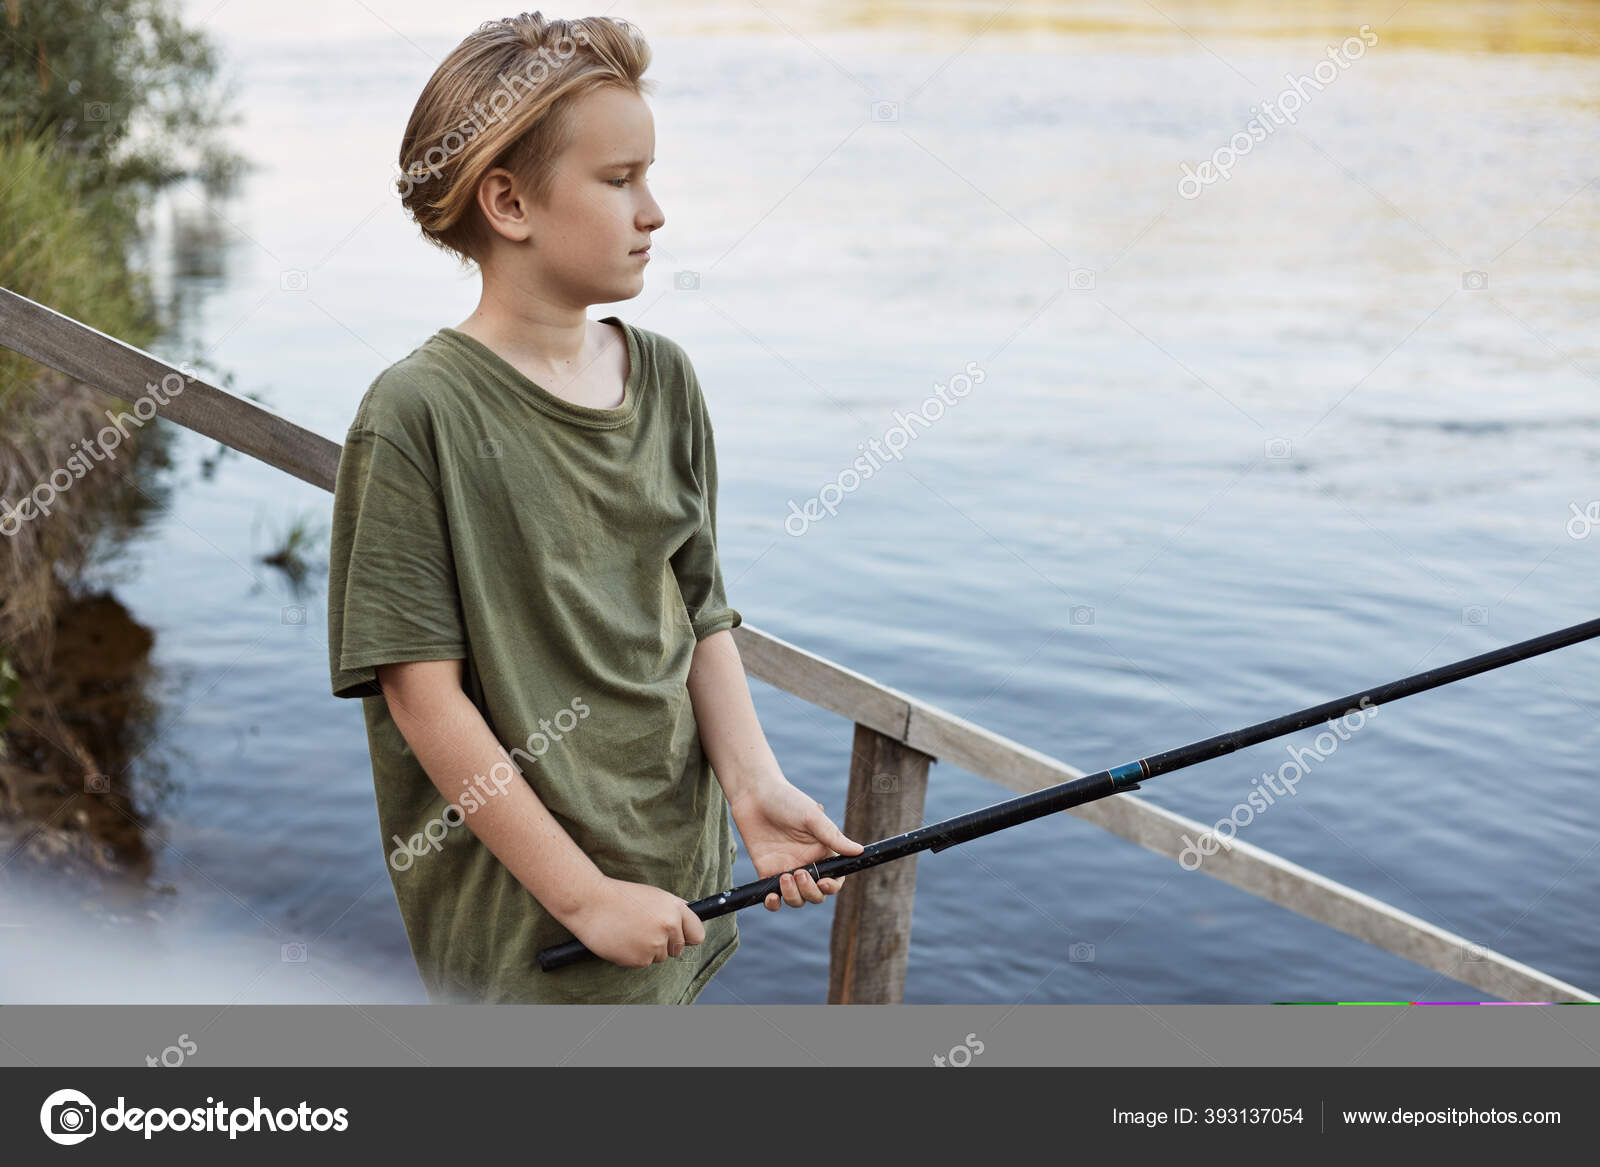 Handsome Blond Male Kid Posing Fishing Rod Hands Wooden Stairs